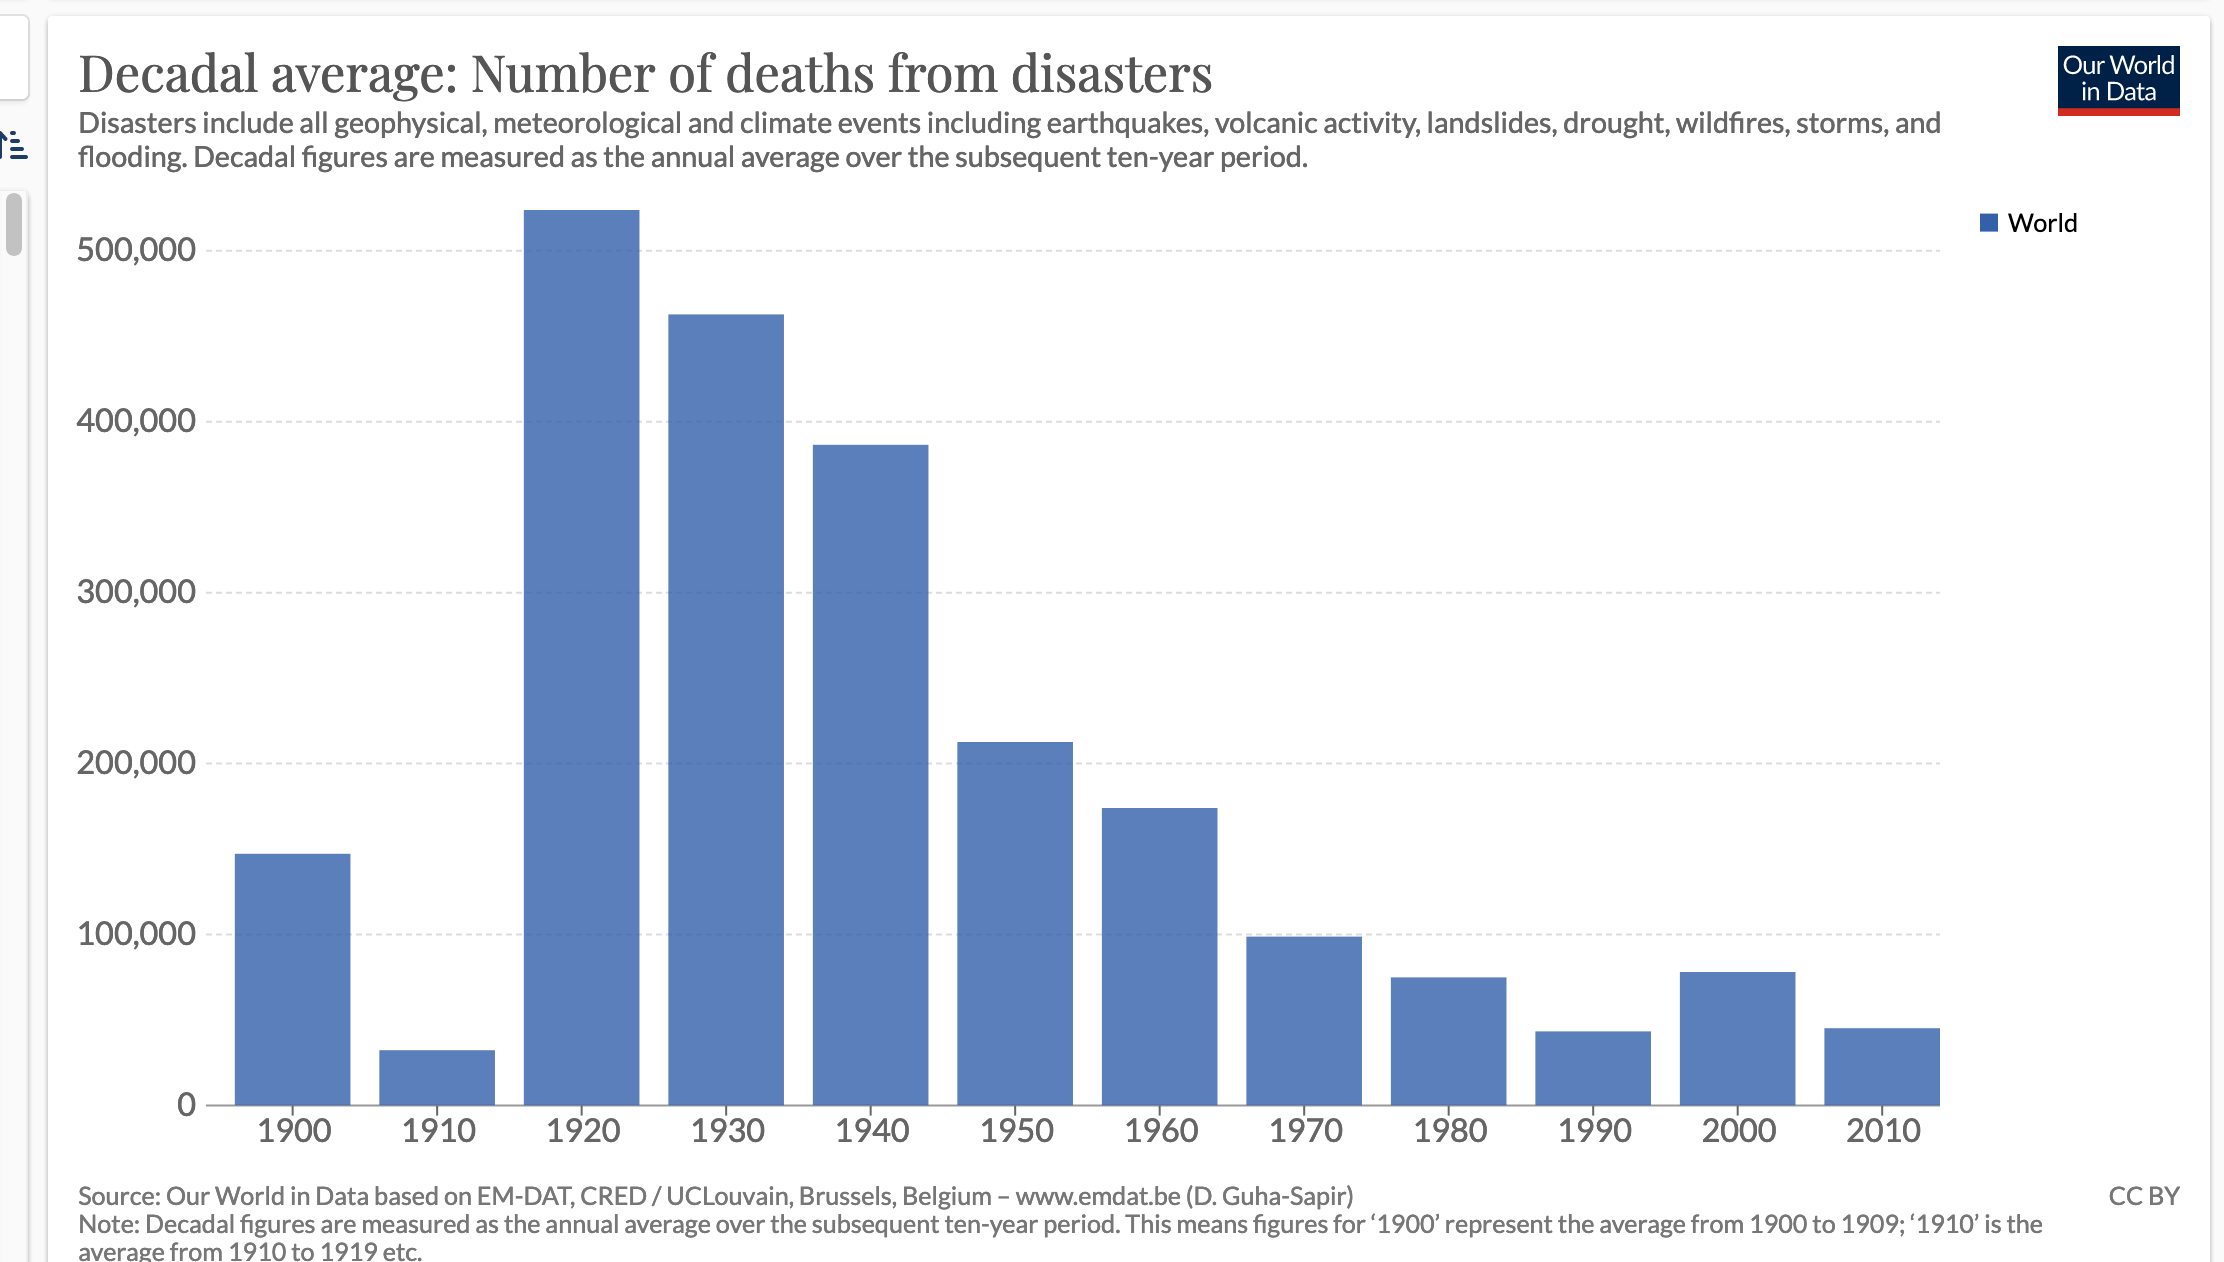 Graph of global deaths from natural disasters, showing massive decline in the past century